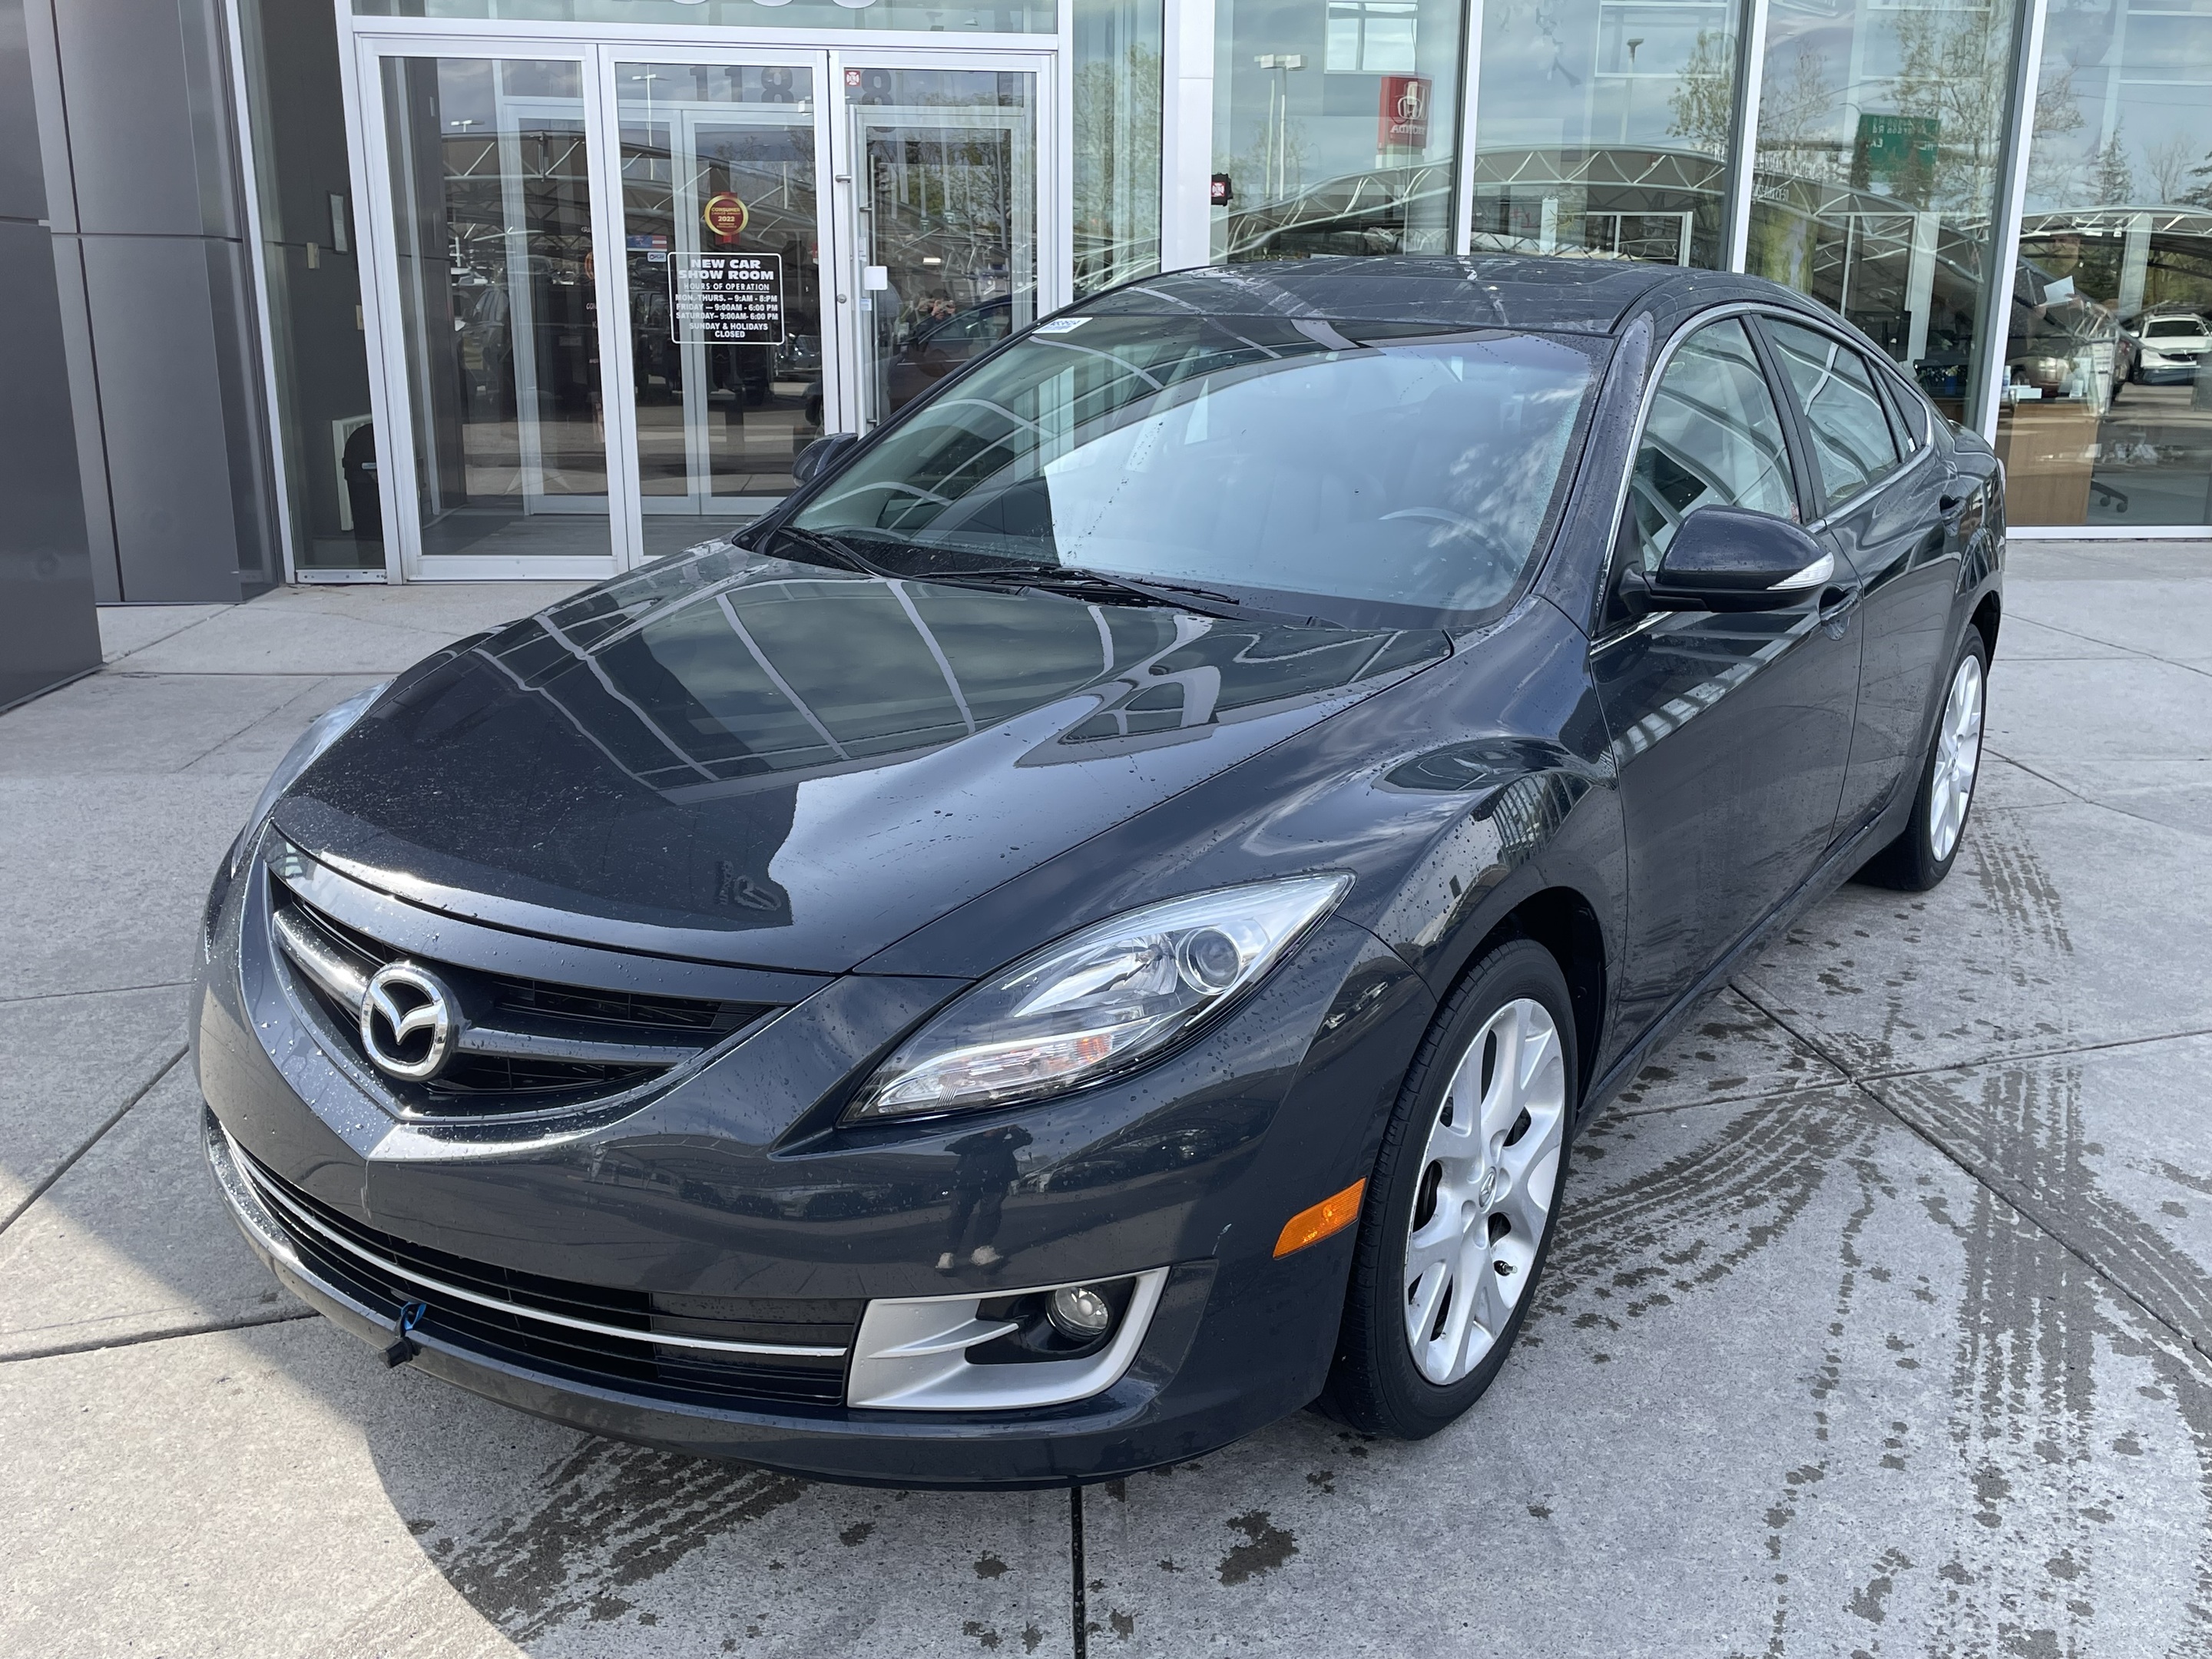 2013 Mazda Mazda6 4dr GT - ONE OWNER|CLEAN CARFAX|AB CAR|LOW KM